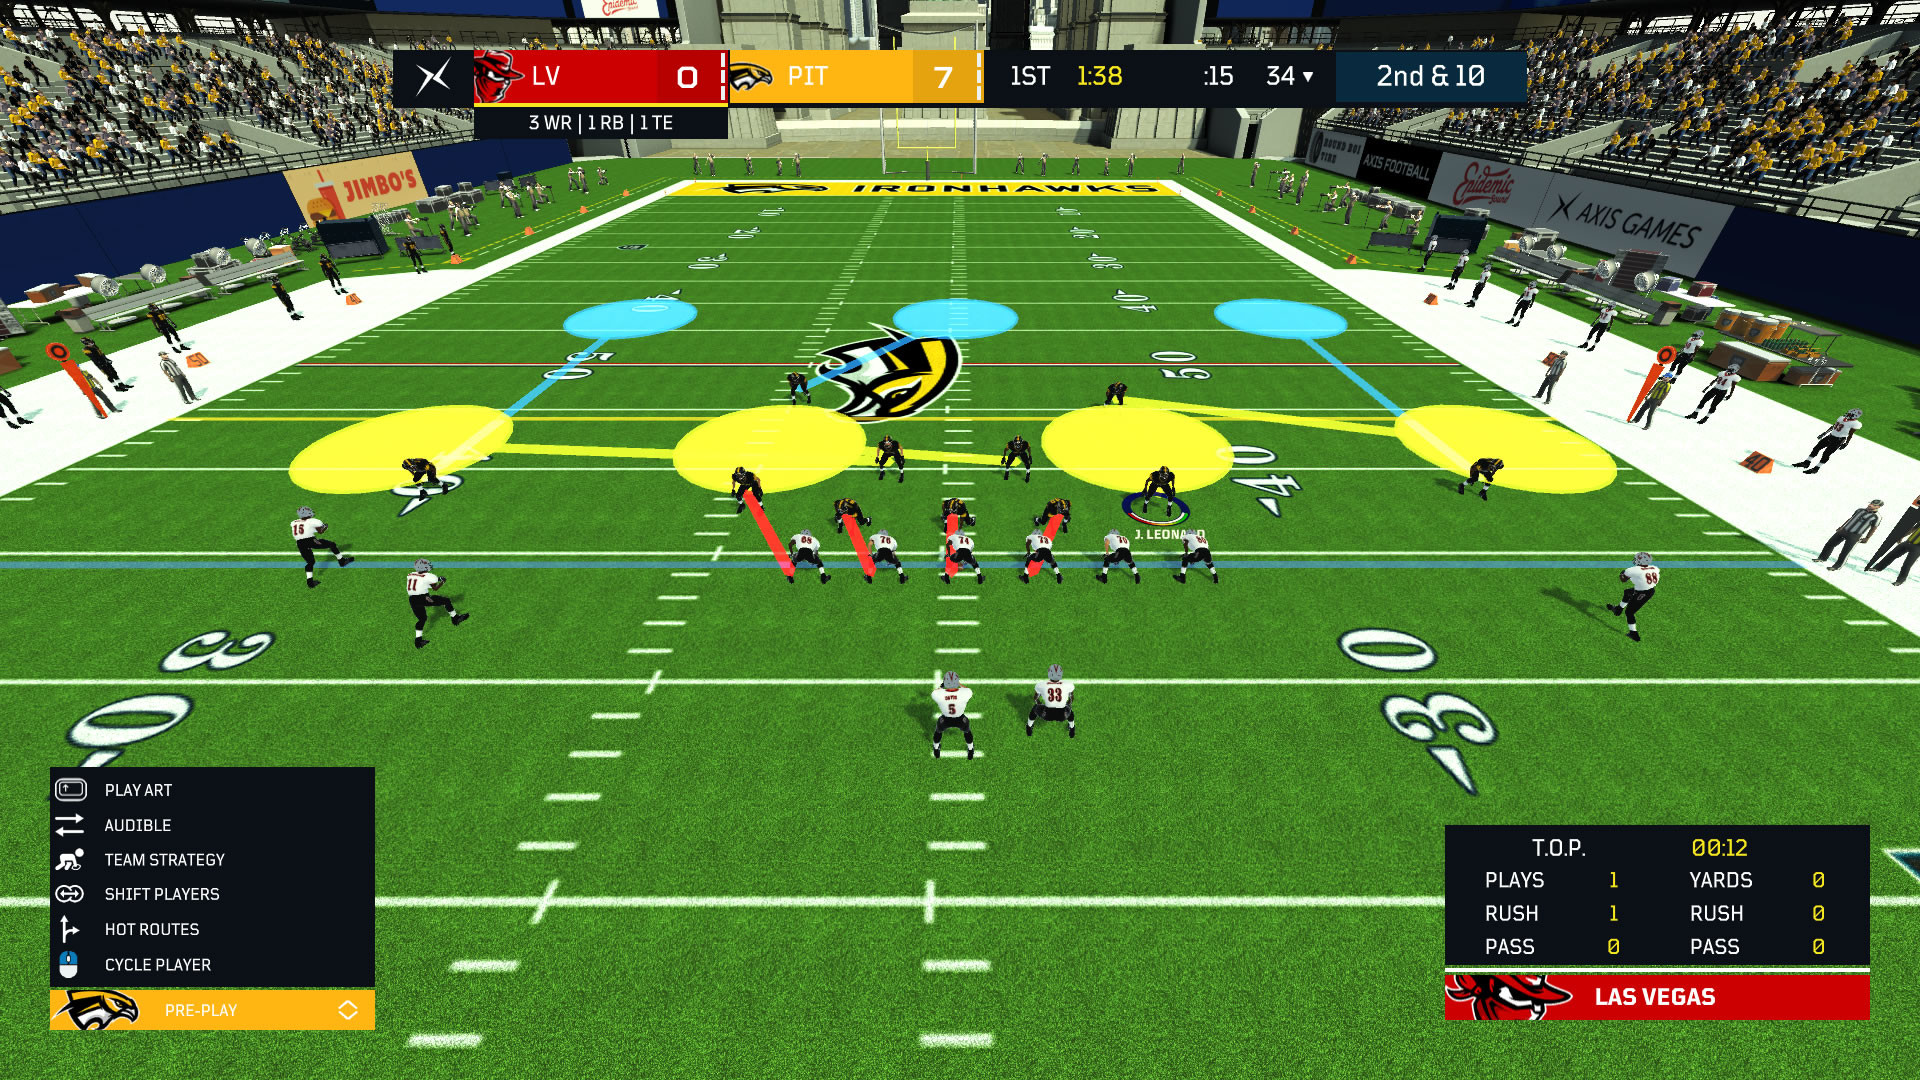 Axis Football 2019 Free Download